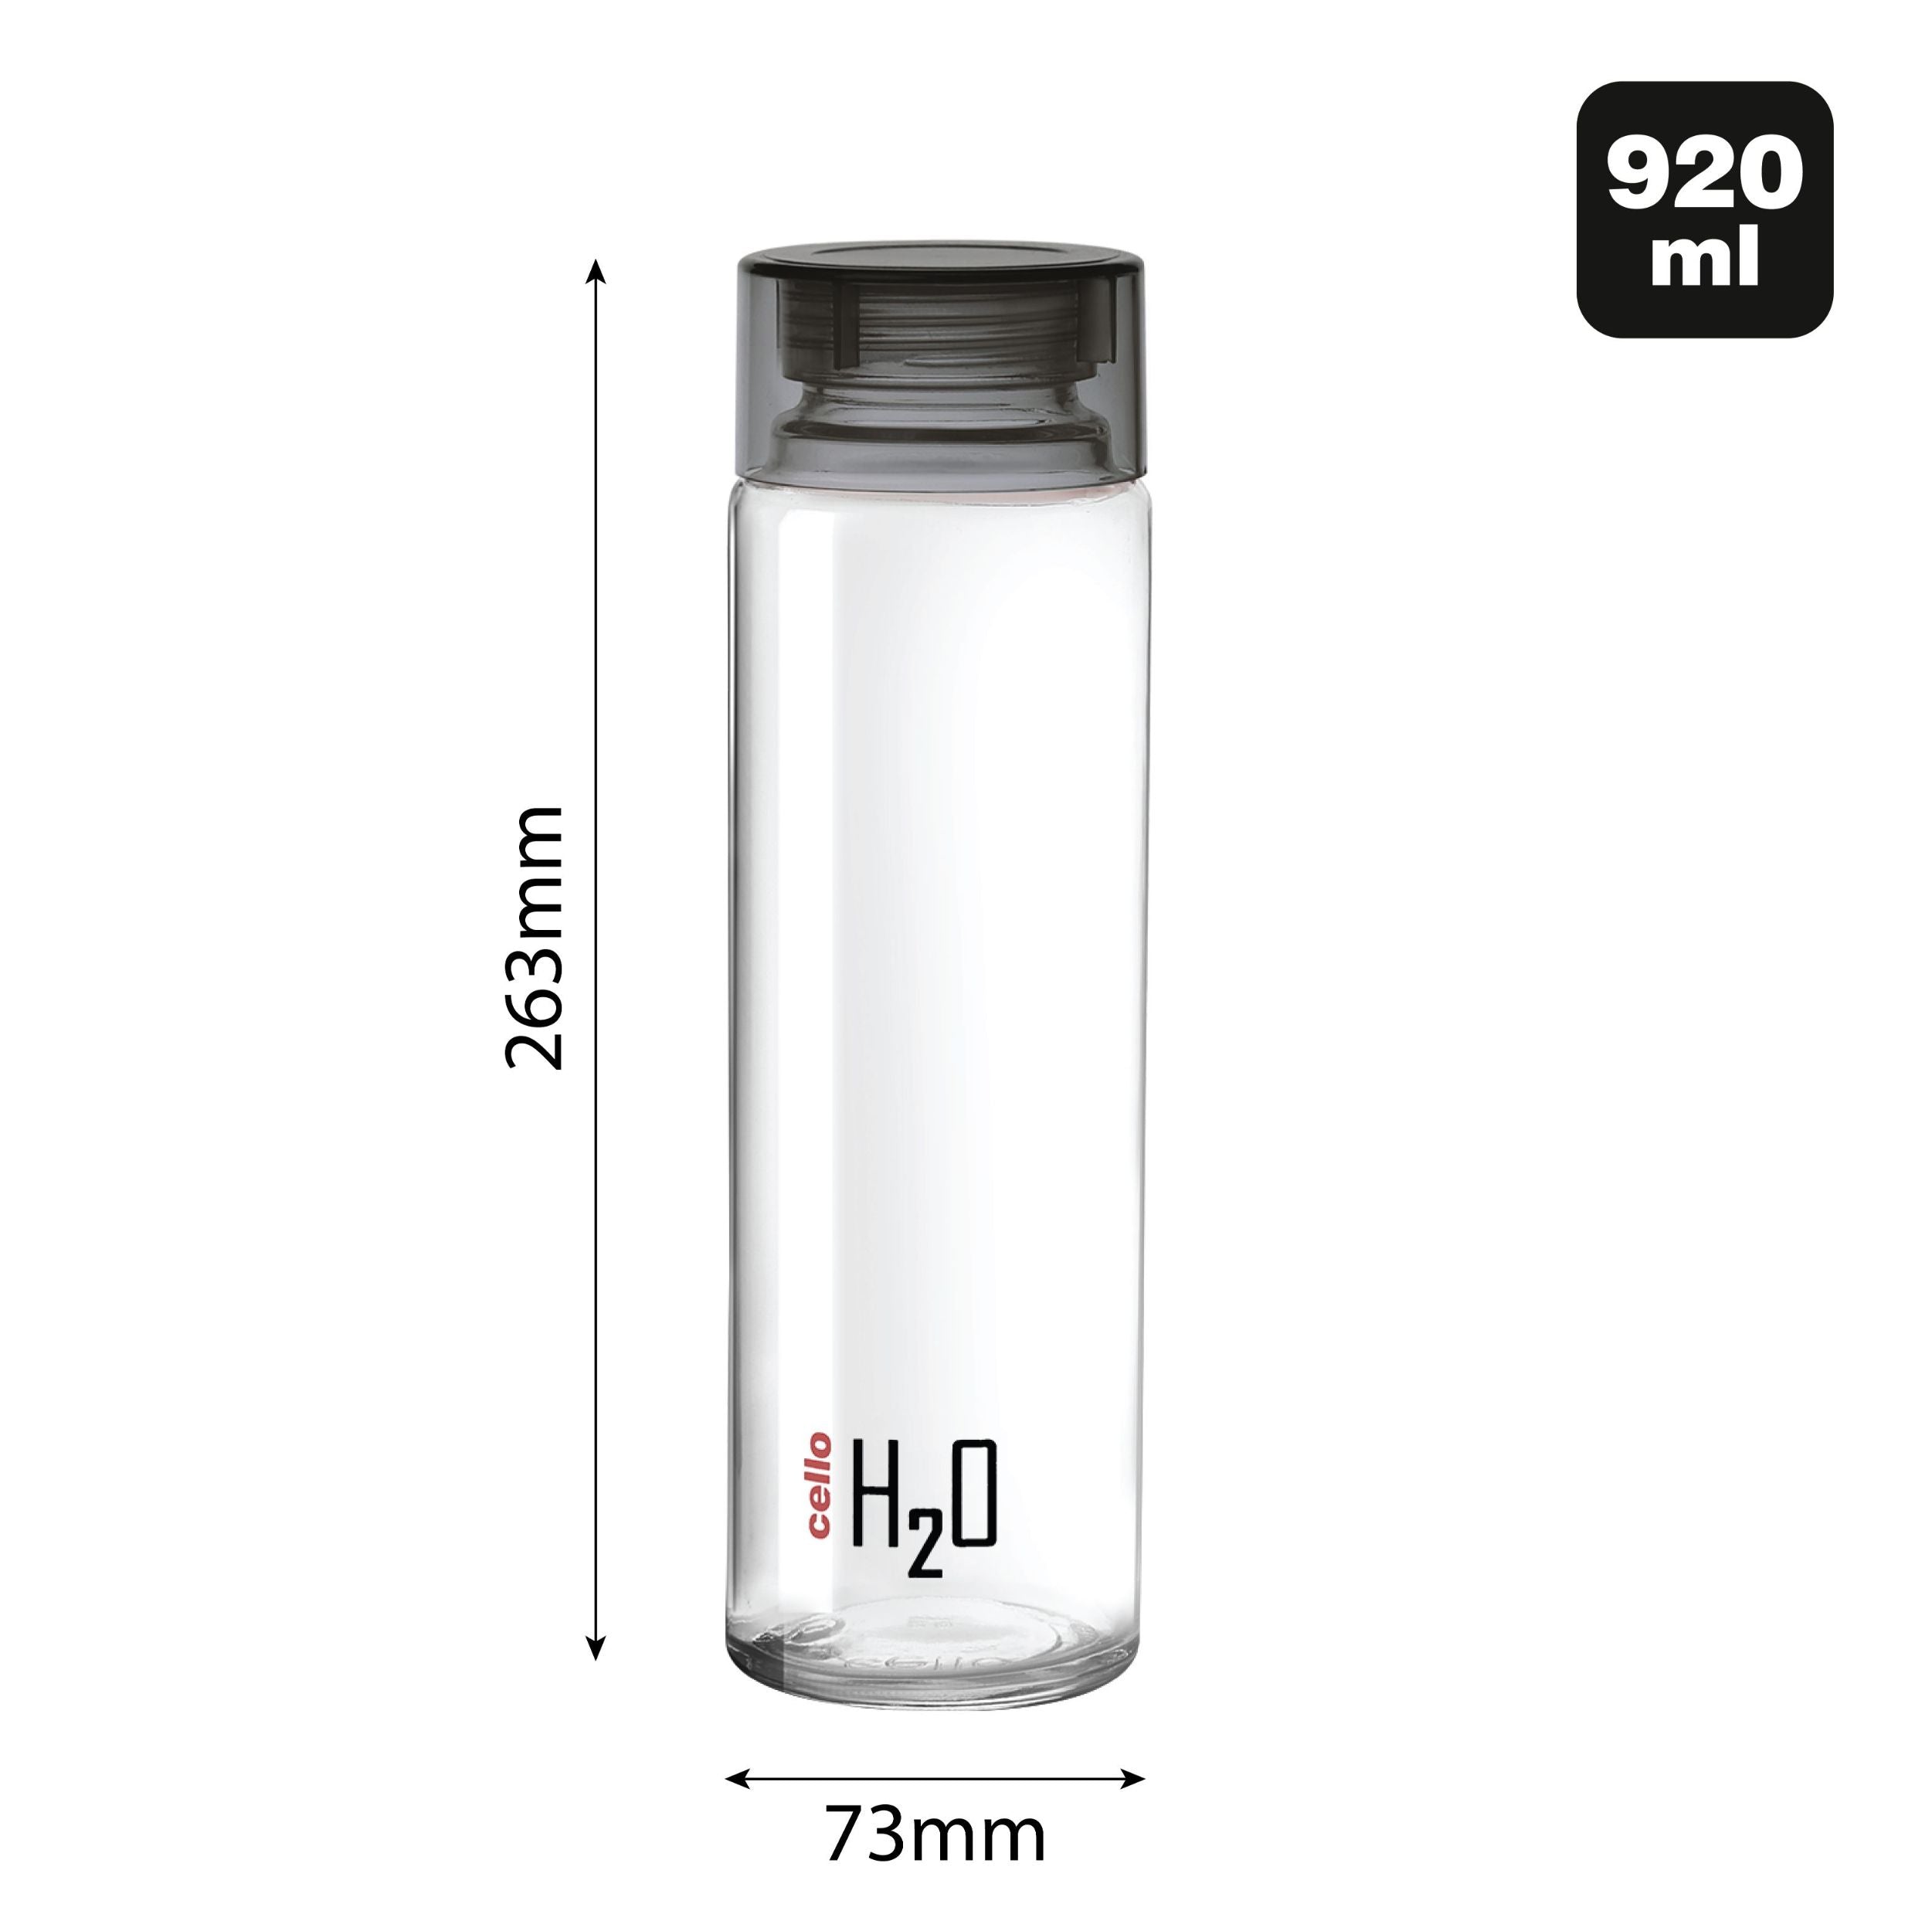 H2O Glass Water Bottle with Plastic Cap, 920ml Black / 920ml / 1 Piece